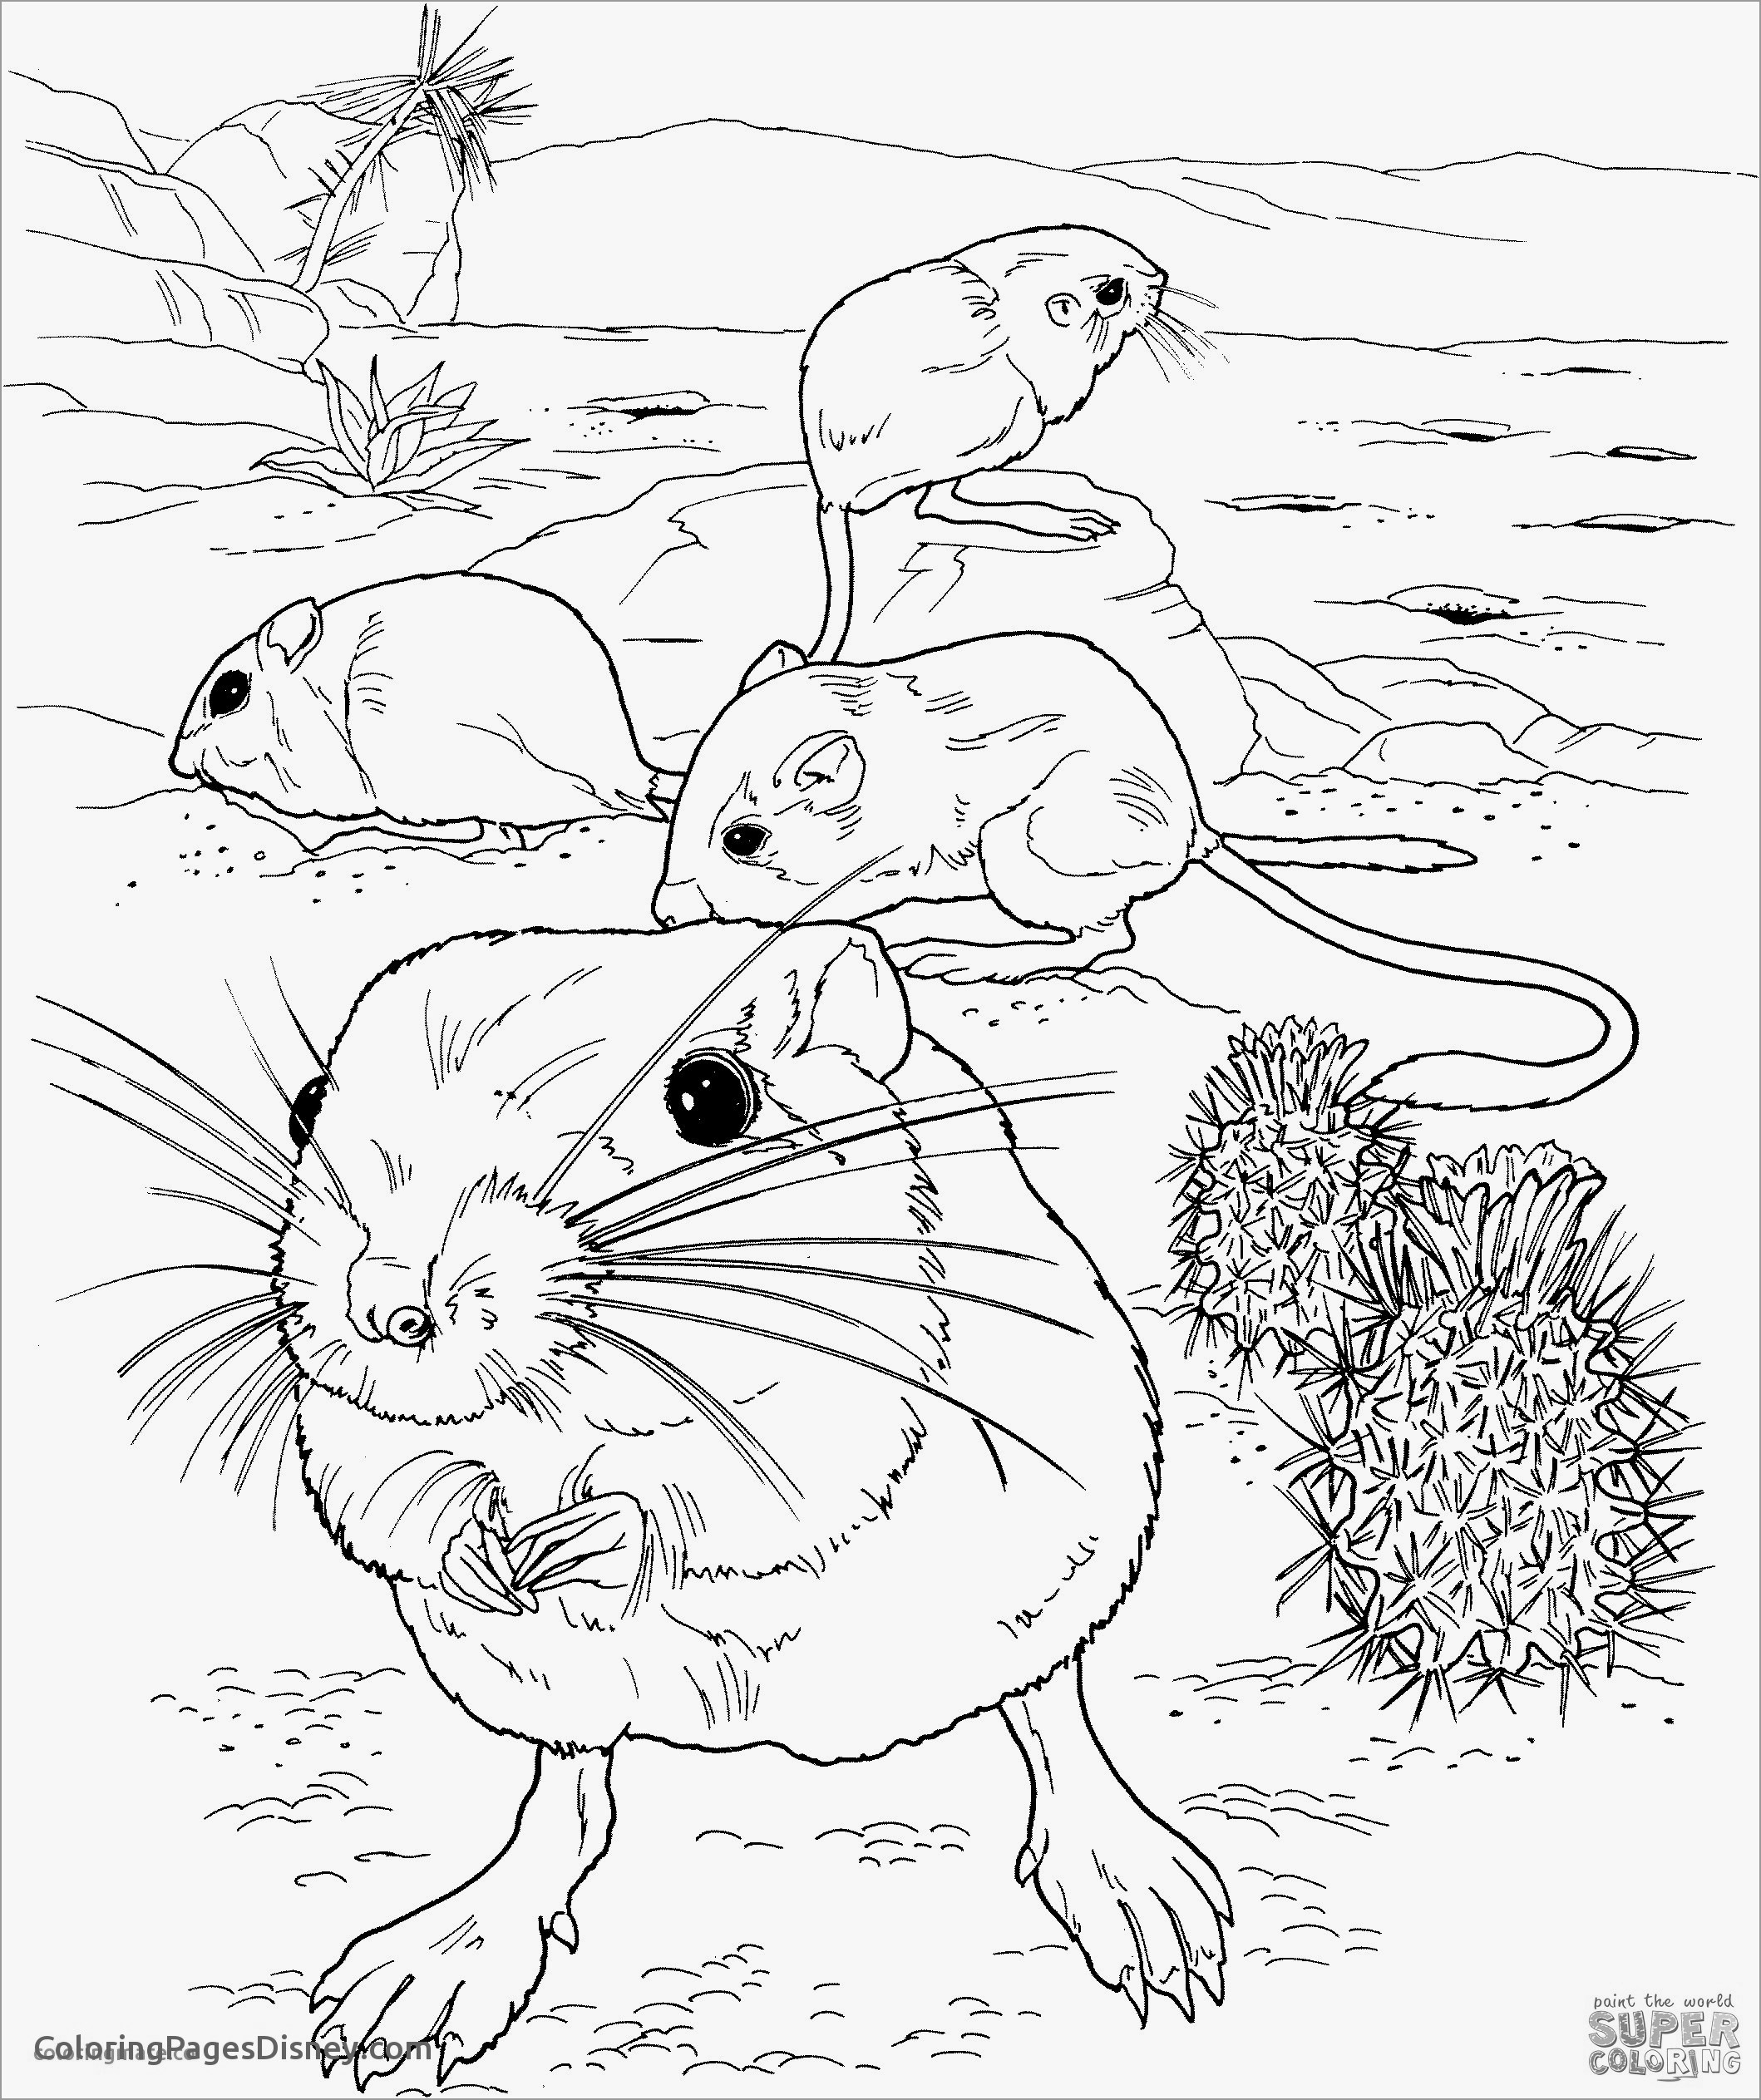 Mole Rat On the Ground Coloring Page